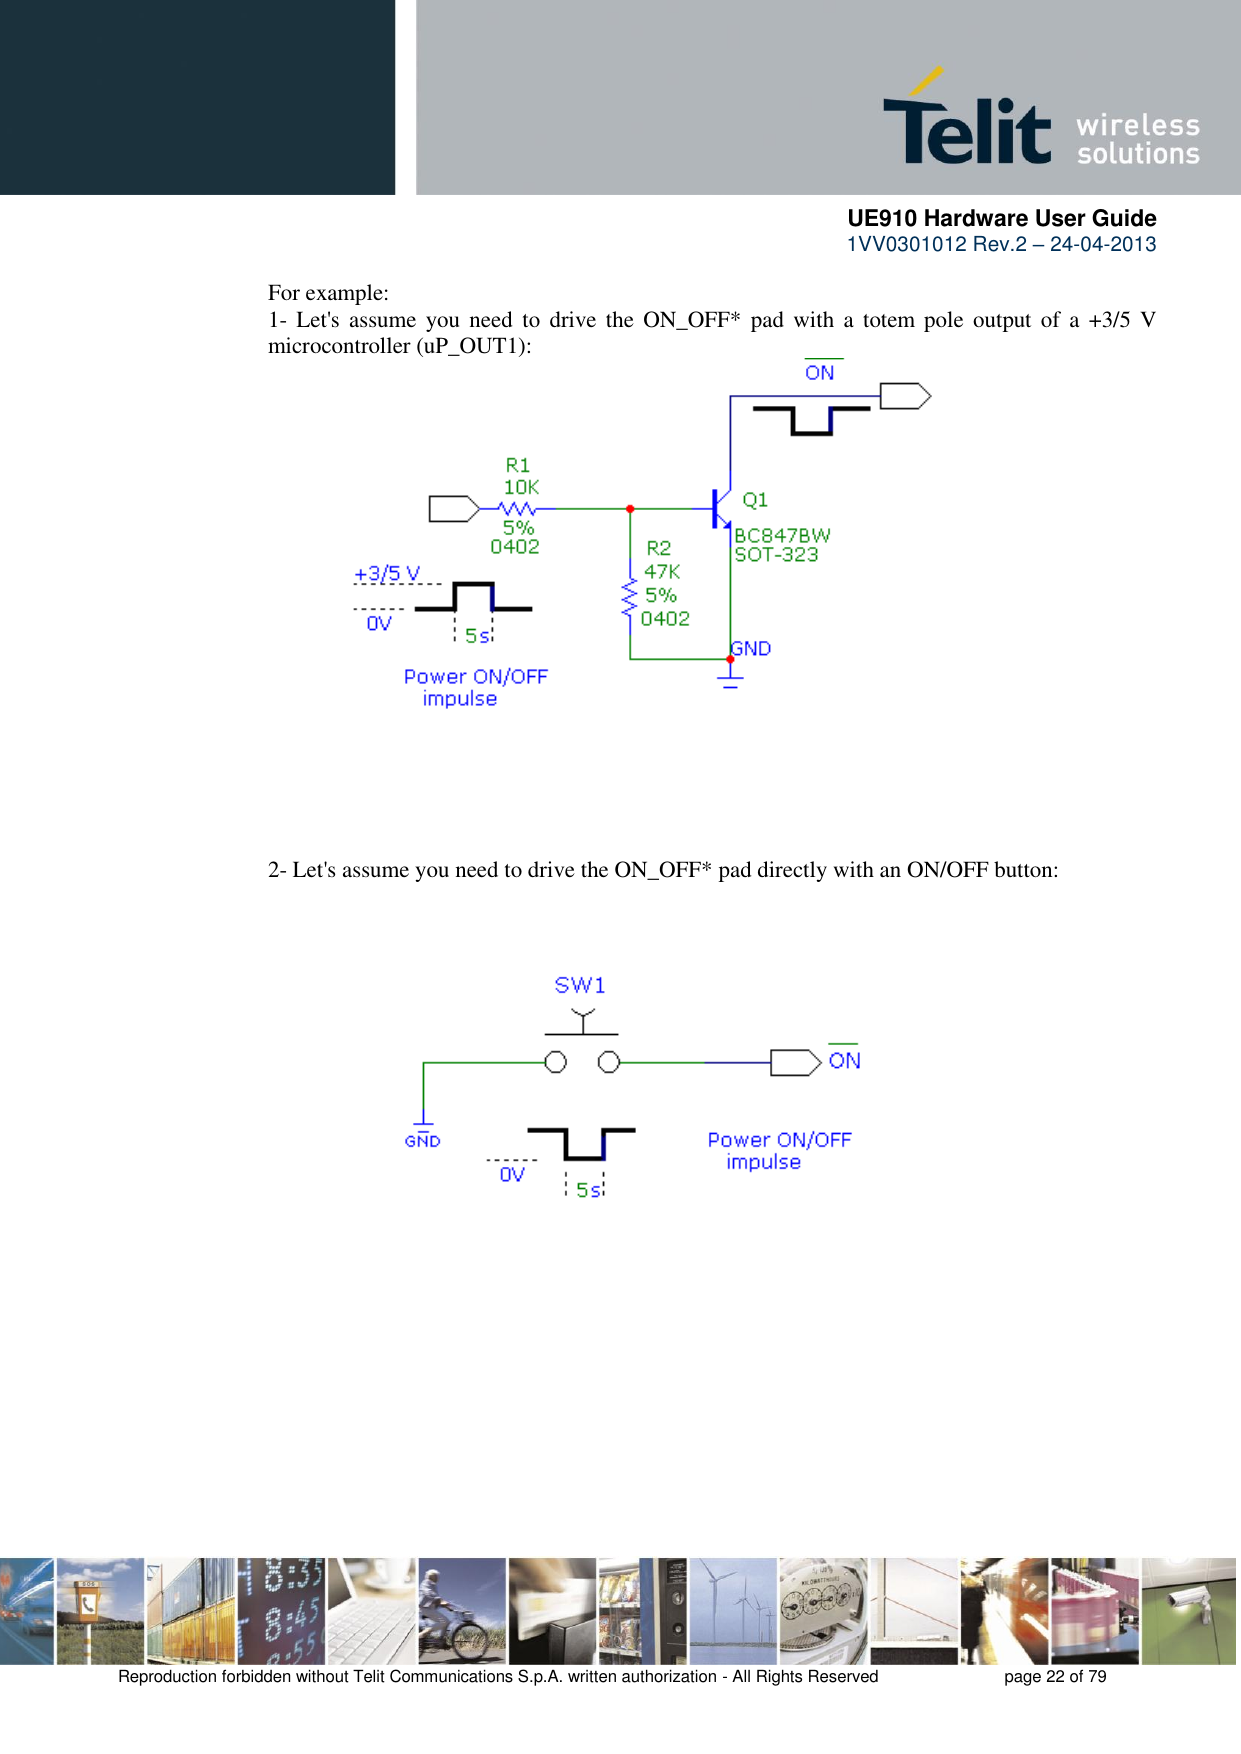      UE910 Hardware User Guide  1VV0301012 Rev.2 – 24-04-2013    Reproduction forbidden without Telit Communications S.p.A. written authorization - All Rights Reserved    page 22 of 79  For example: 1- Let&apos;s assume  you need  to  drive the  ON_OFF*  pad with  a  totem pole output of a  +3/5 V microcontroller (uP_OUT1): 2- Let&apos;s assume you need to drive the ON_OFF* pad directly with an ON/OFF button: 